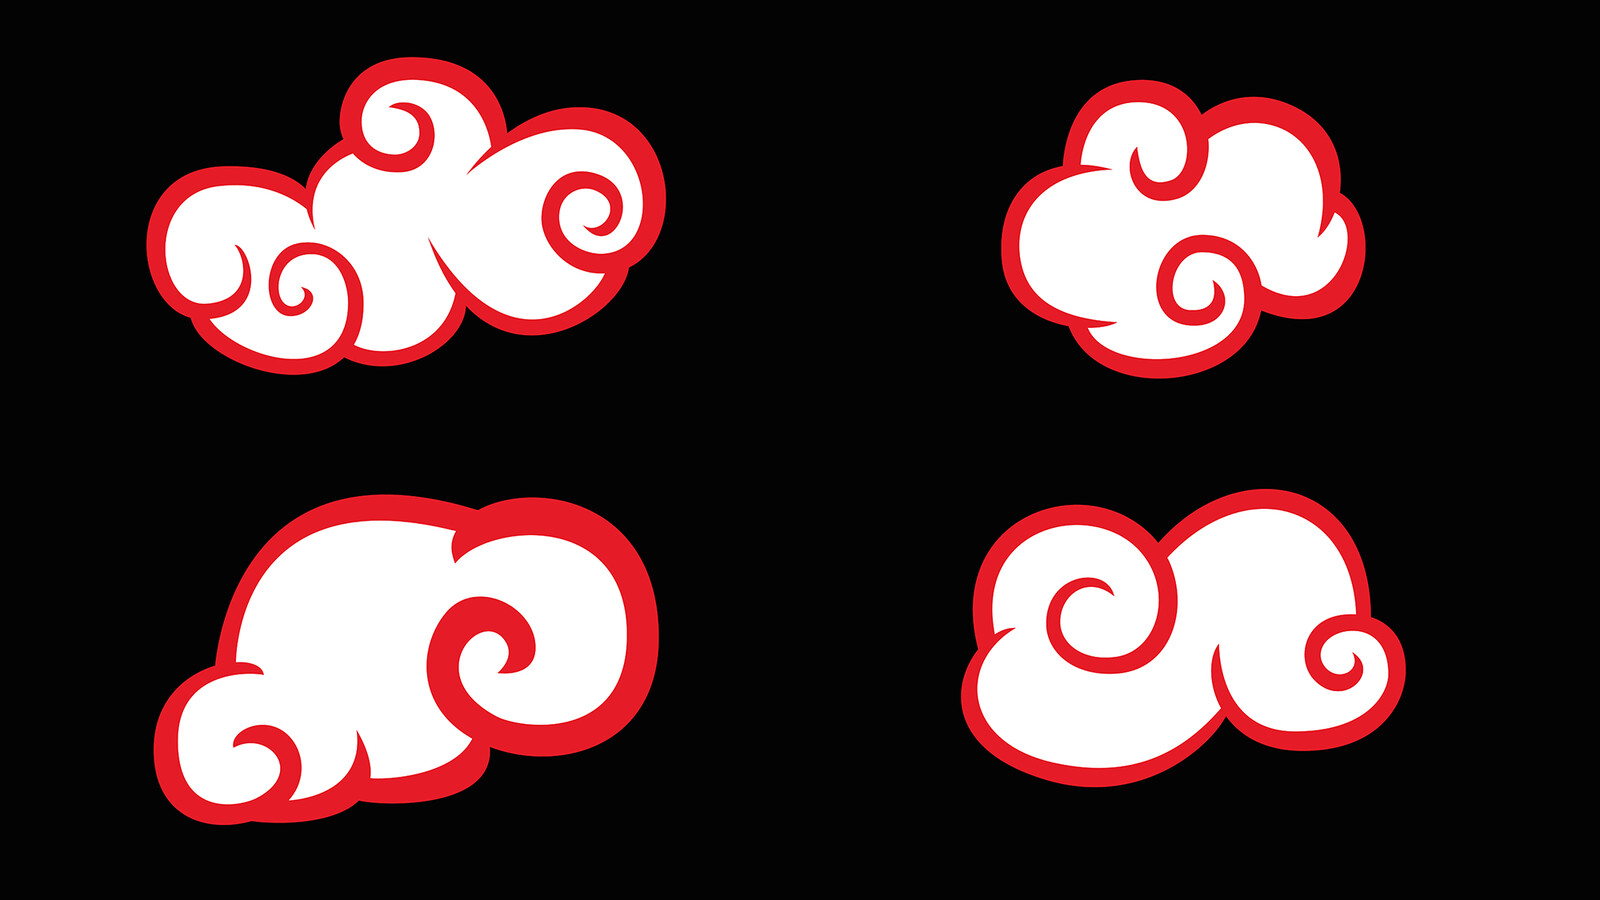 Clouds created with Adobe Illustrator